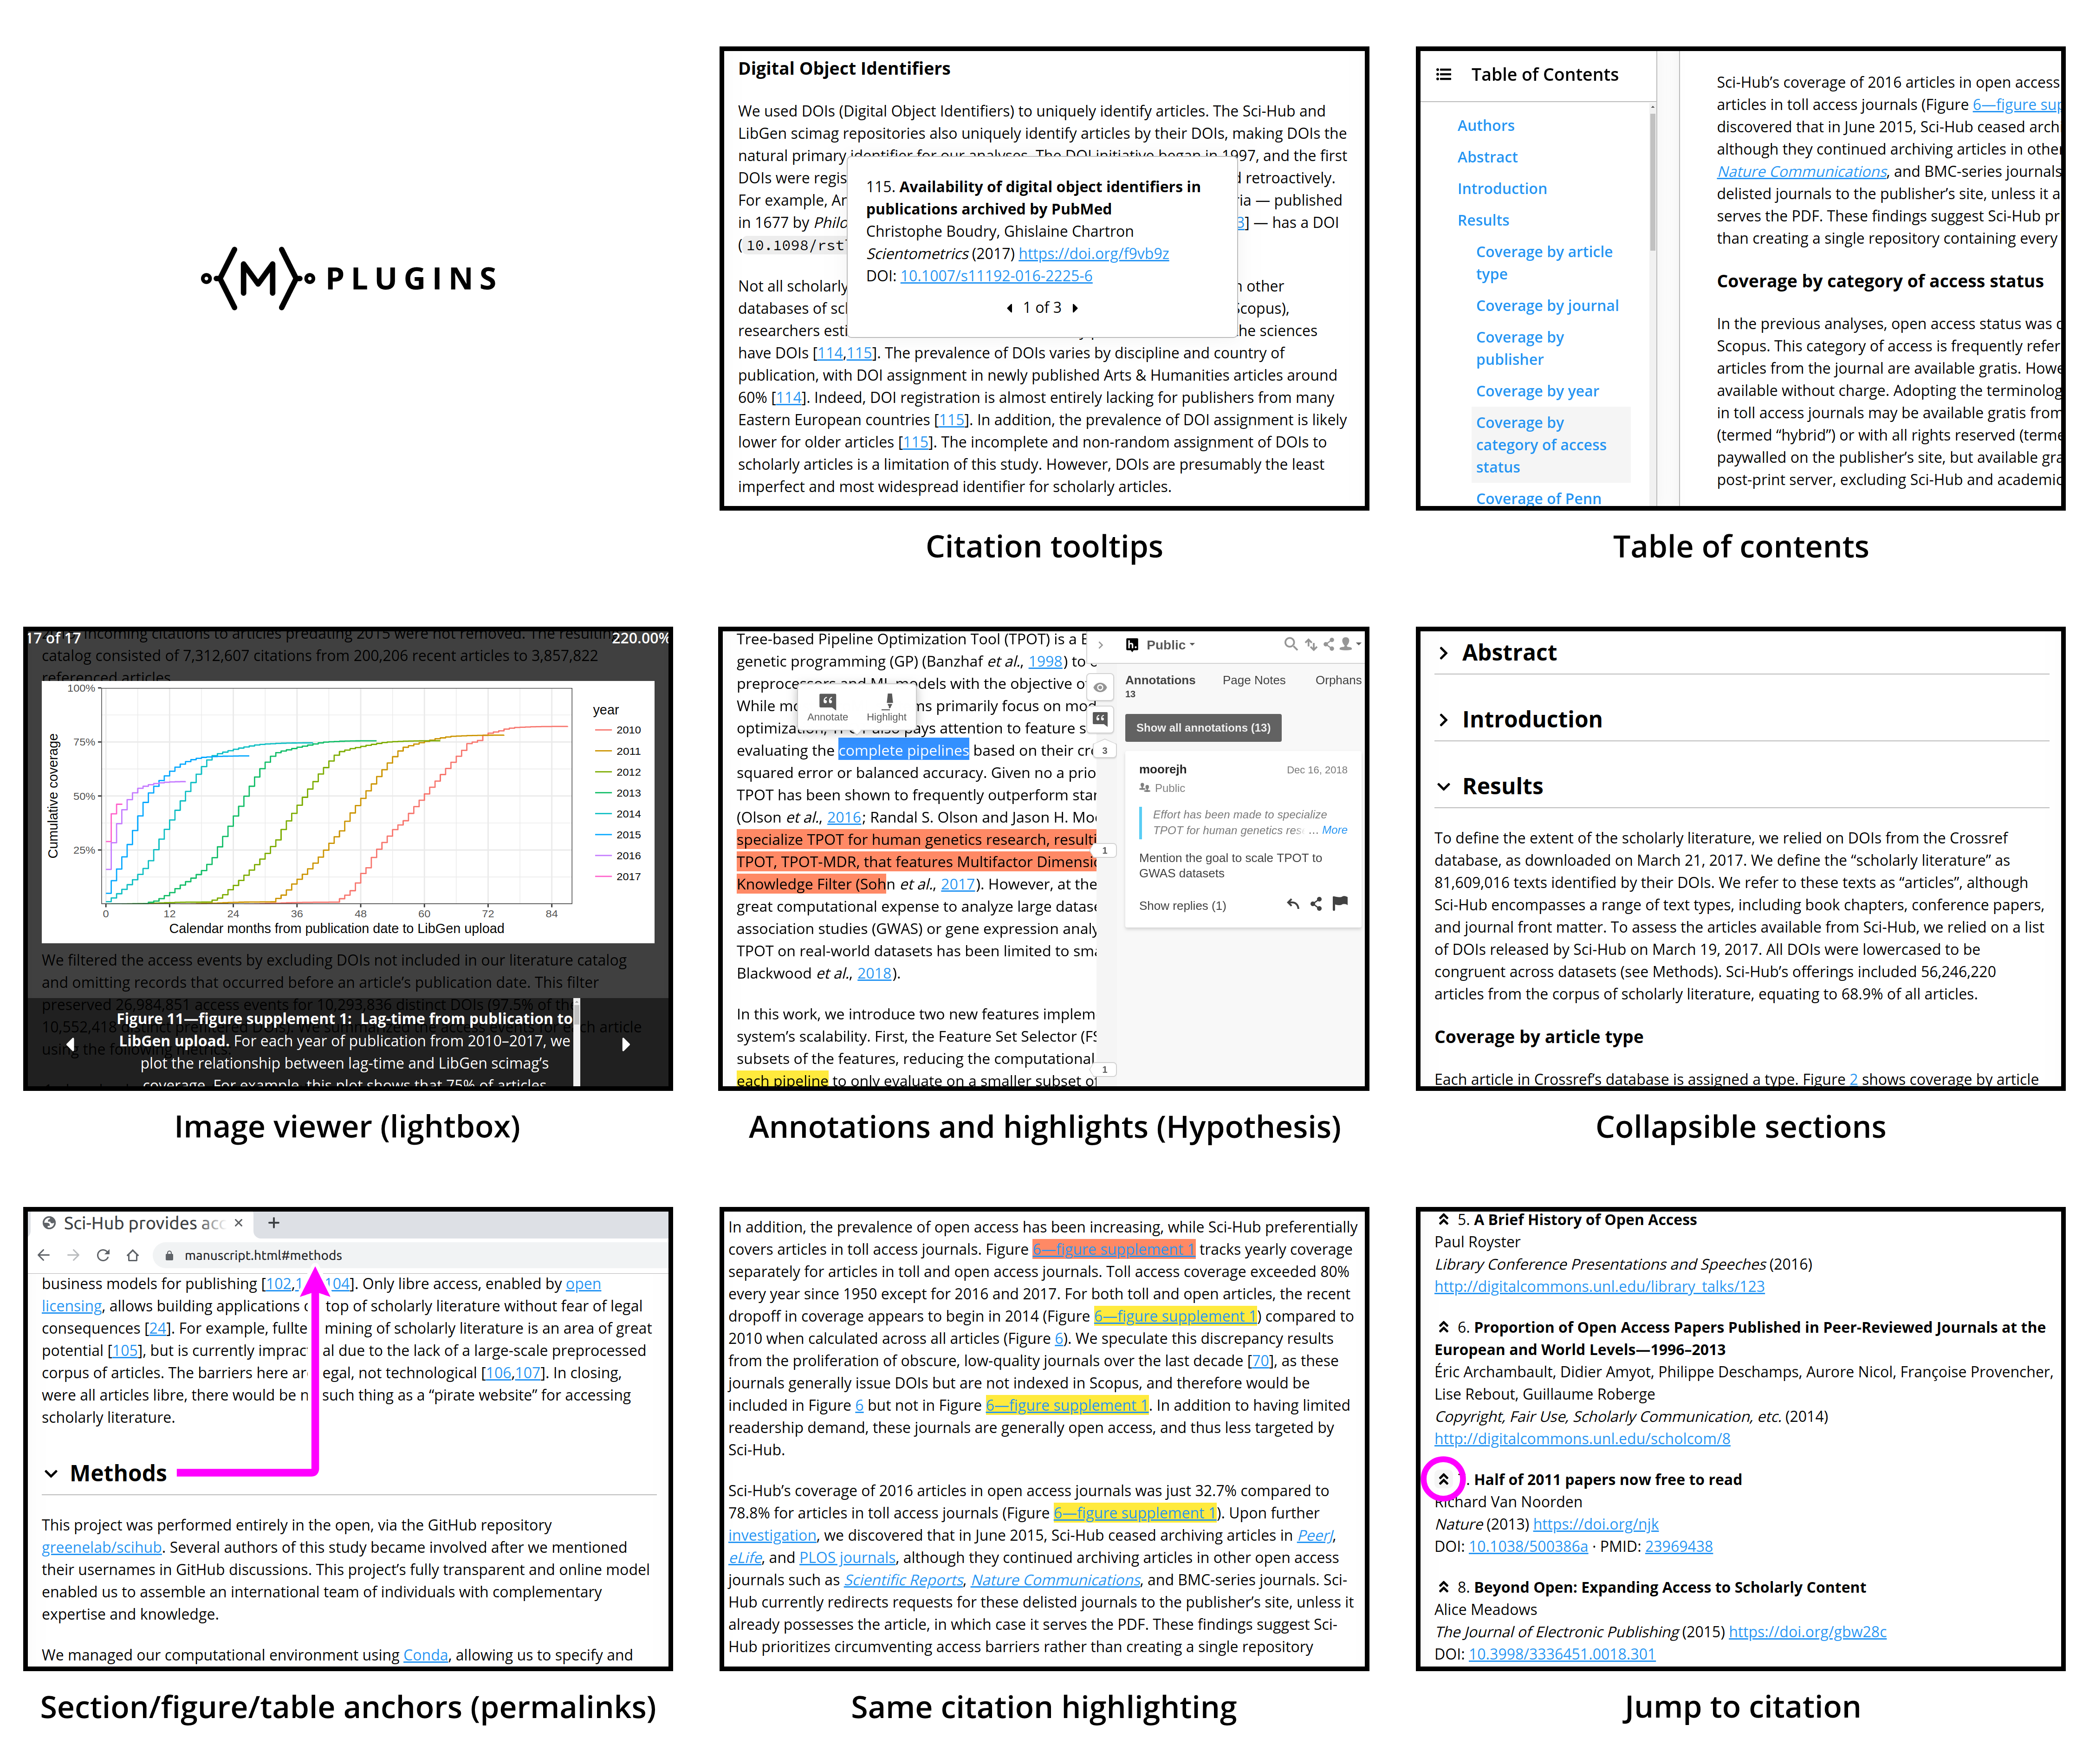 Figure 3: Examples of the various Manubot plugins, illustrating their functionality and usefulness. Screenshots were taken from existing manuscripts made with Manubot: Sci-Hub Coverage Study and TPOT-FSS, available under the CC BY 4.0 License. Clarifying markups are overlaid in purple.